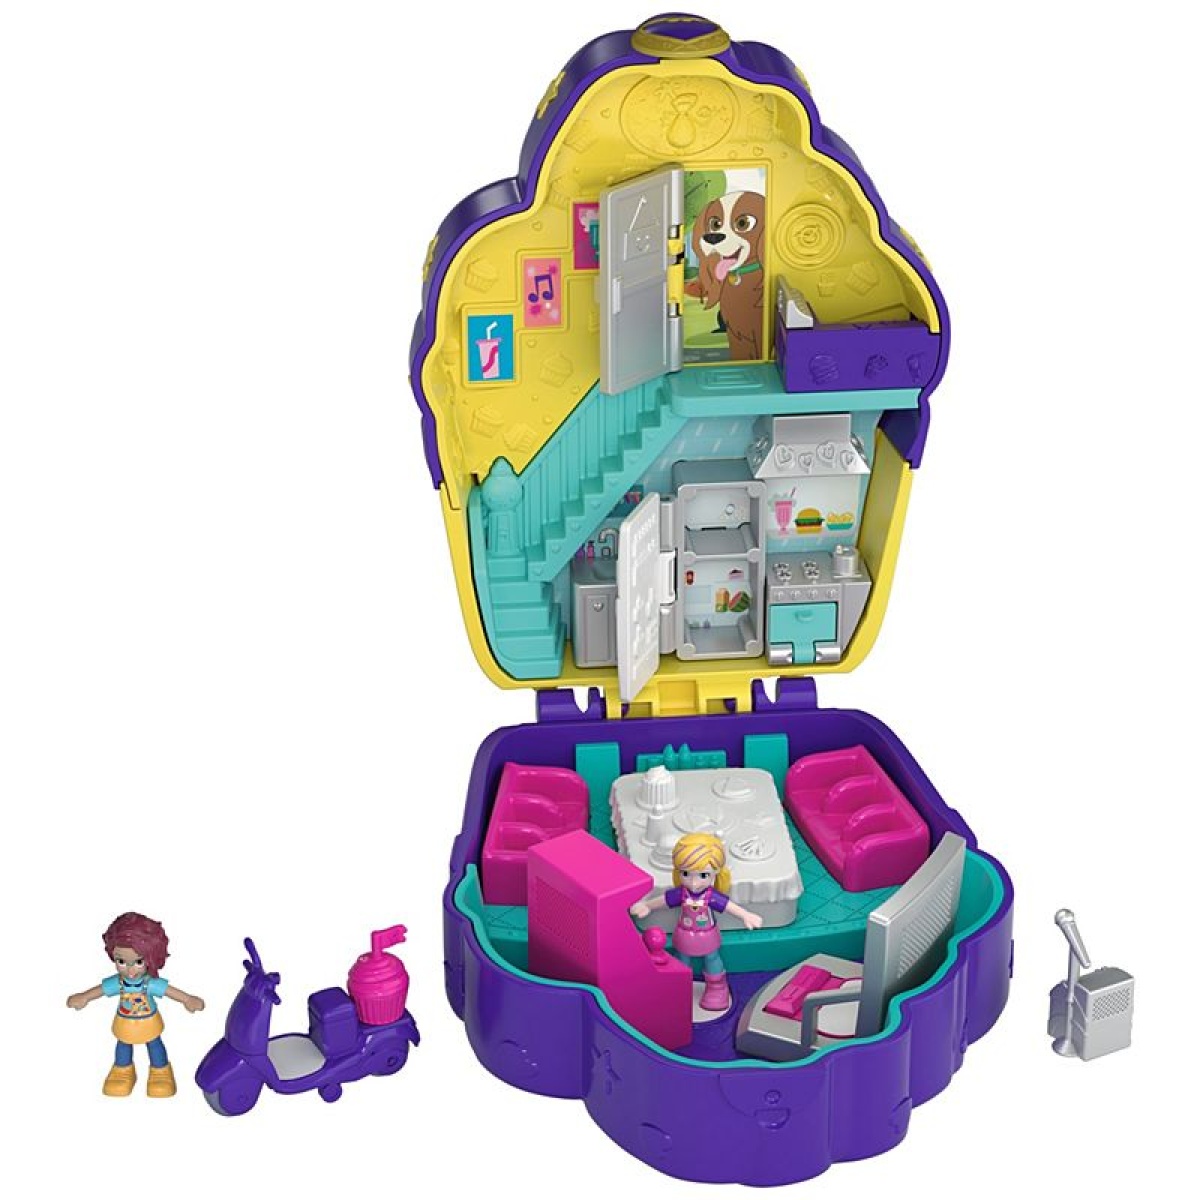 Polly Pocket Spin 'n Surprise Compact Playset, Tropical Smoothie Shape,  Waterpark Theme, 3 Floors, 25 Surprise Accessories Inc - ToysChoose